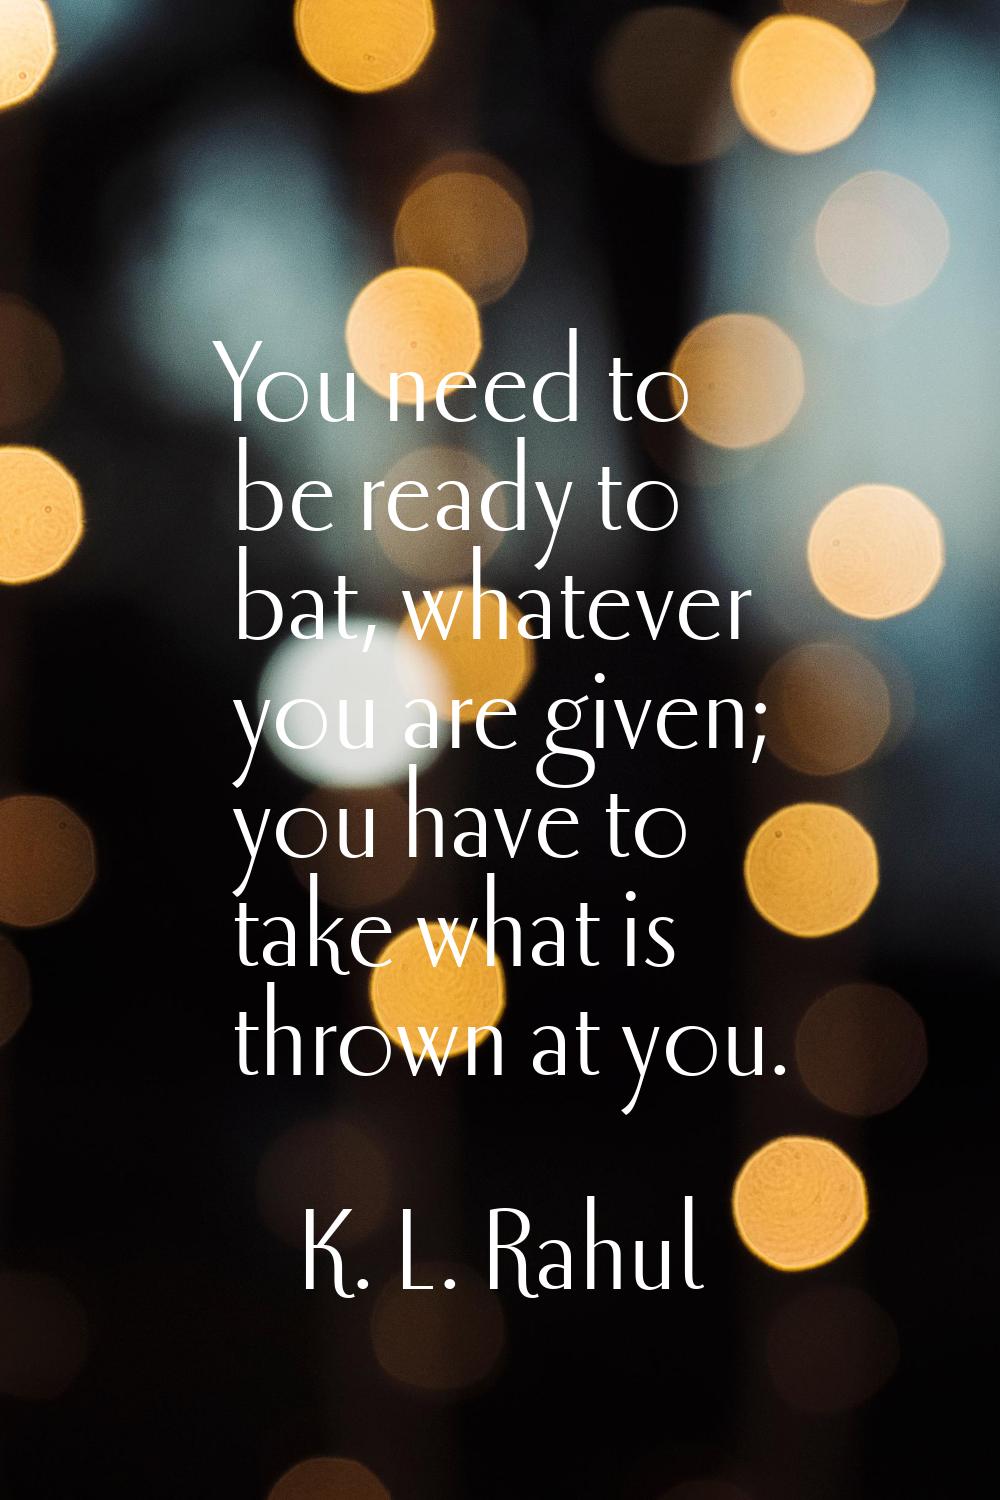 You need to be ready to bat, whatever you are given; you have to take what is thrown at you.